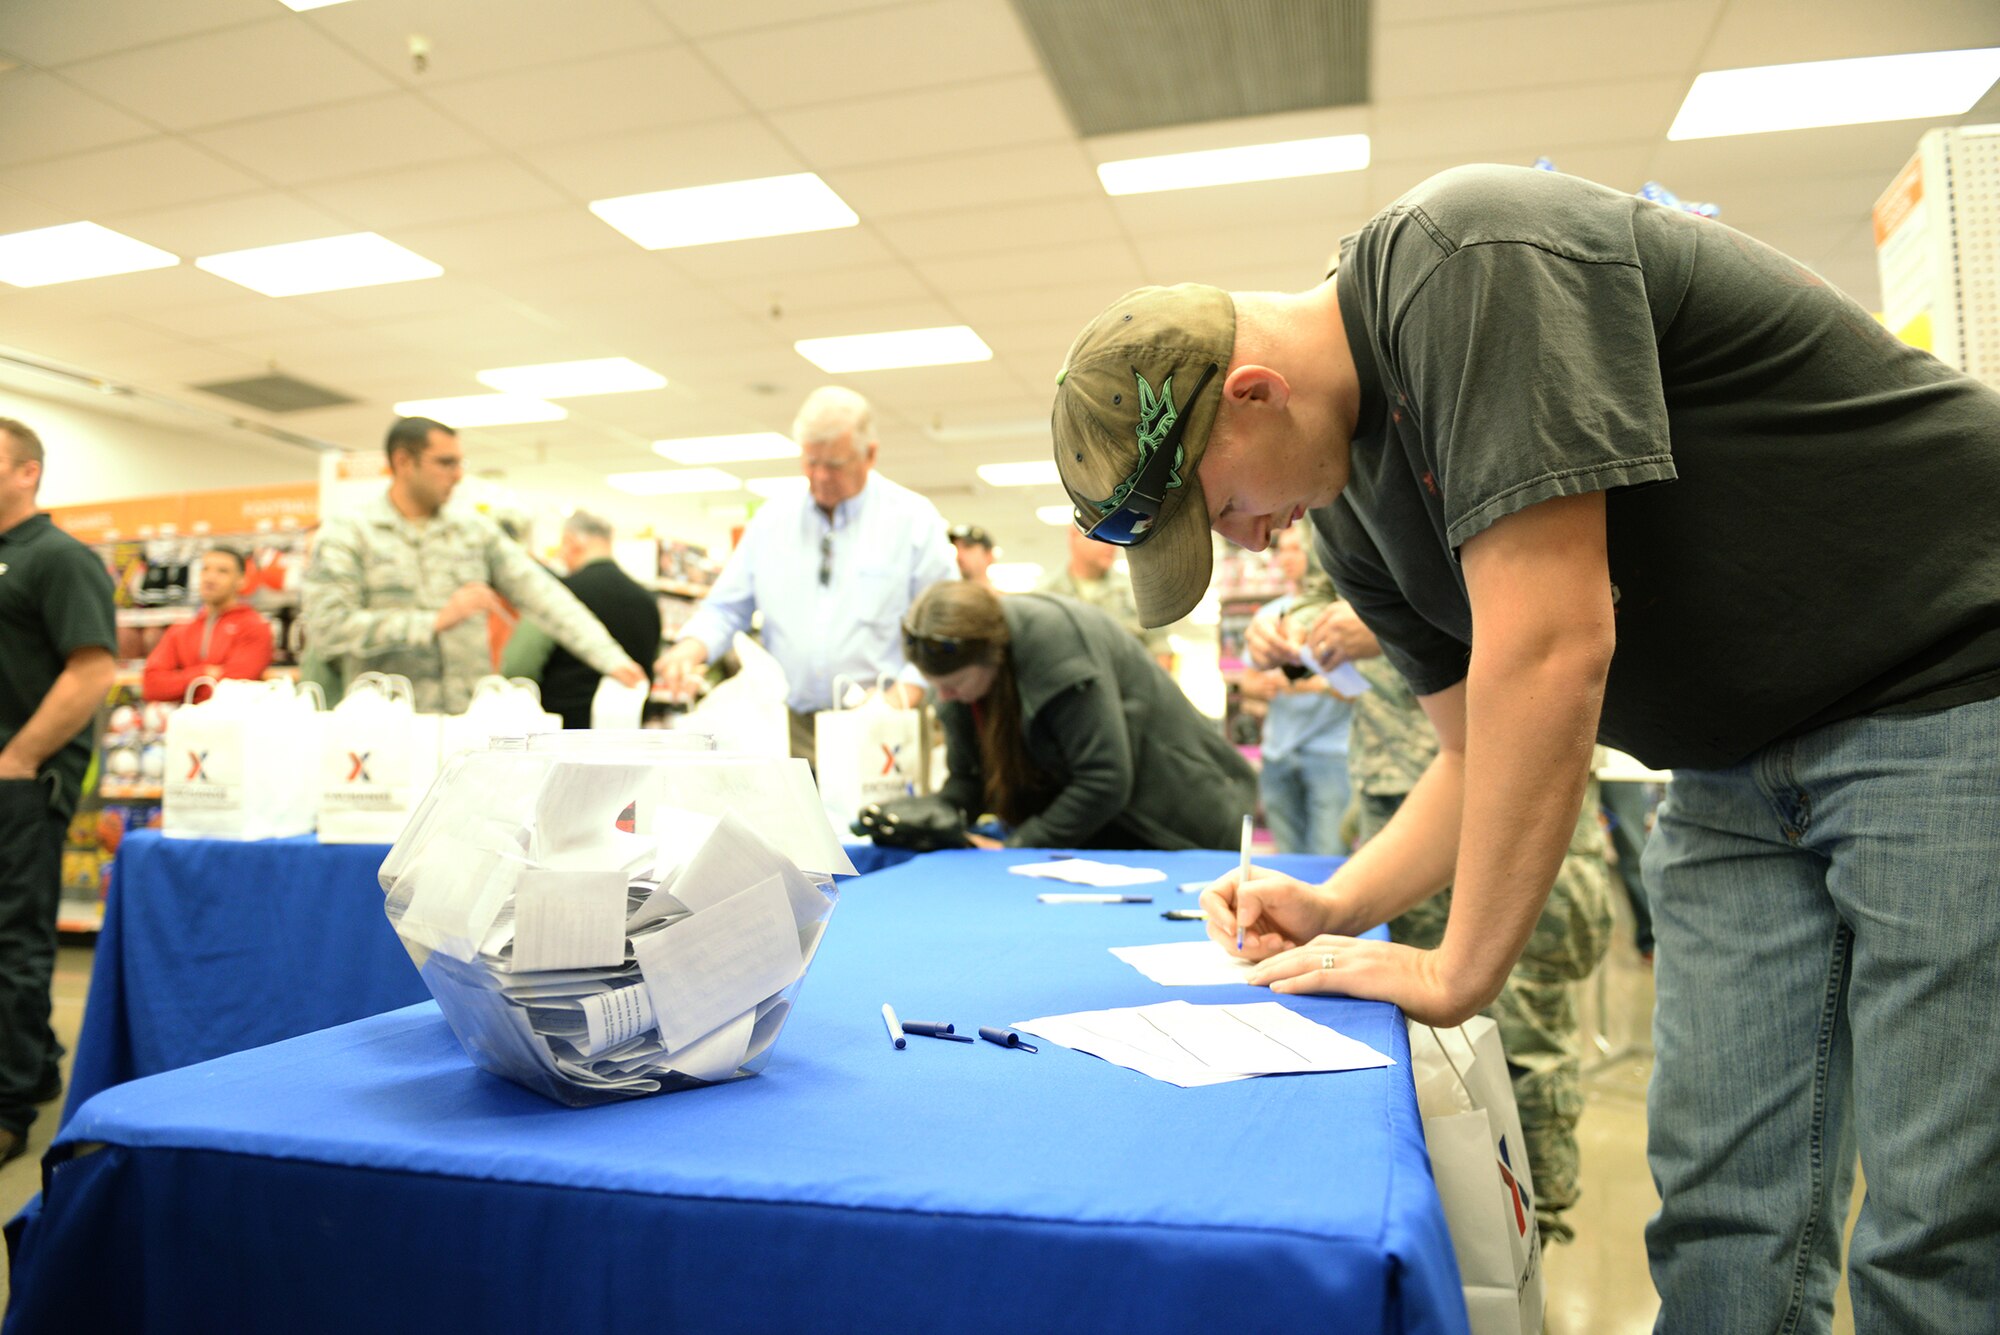 Senior Airman Austin Kauffman, enters a raffle for a free drawing at the newly renovated Base exchange gun shop at Beale Air Force Base, California, Feb 25, 2016. The approximate $1.9 million project included new flooring, a floor plan to accommodate an expanded product line, new displays and a new central checkout location.